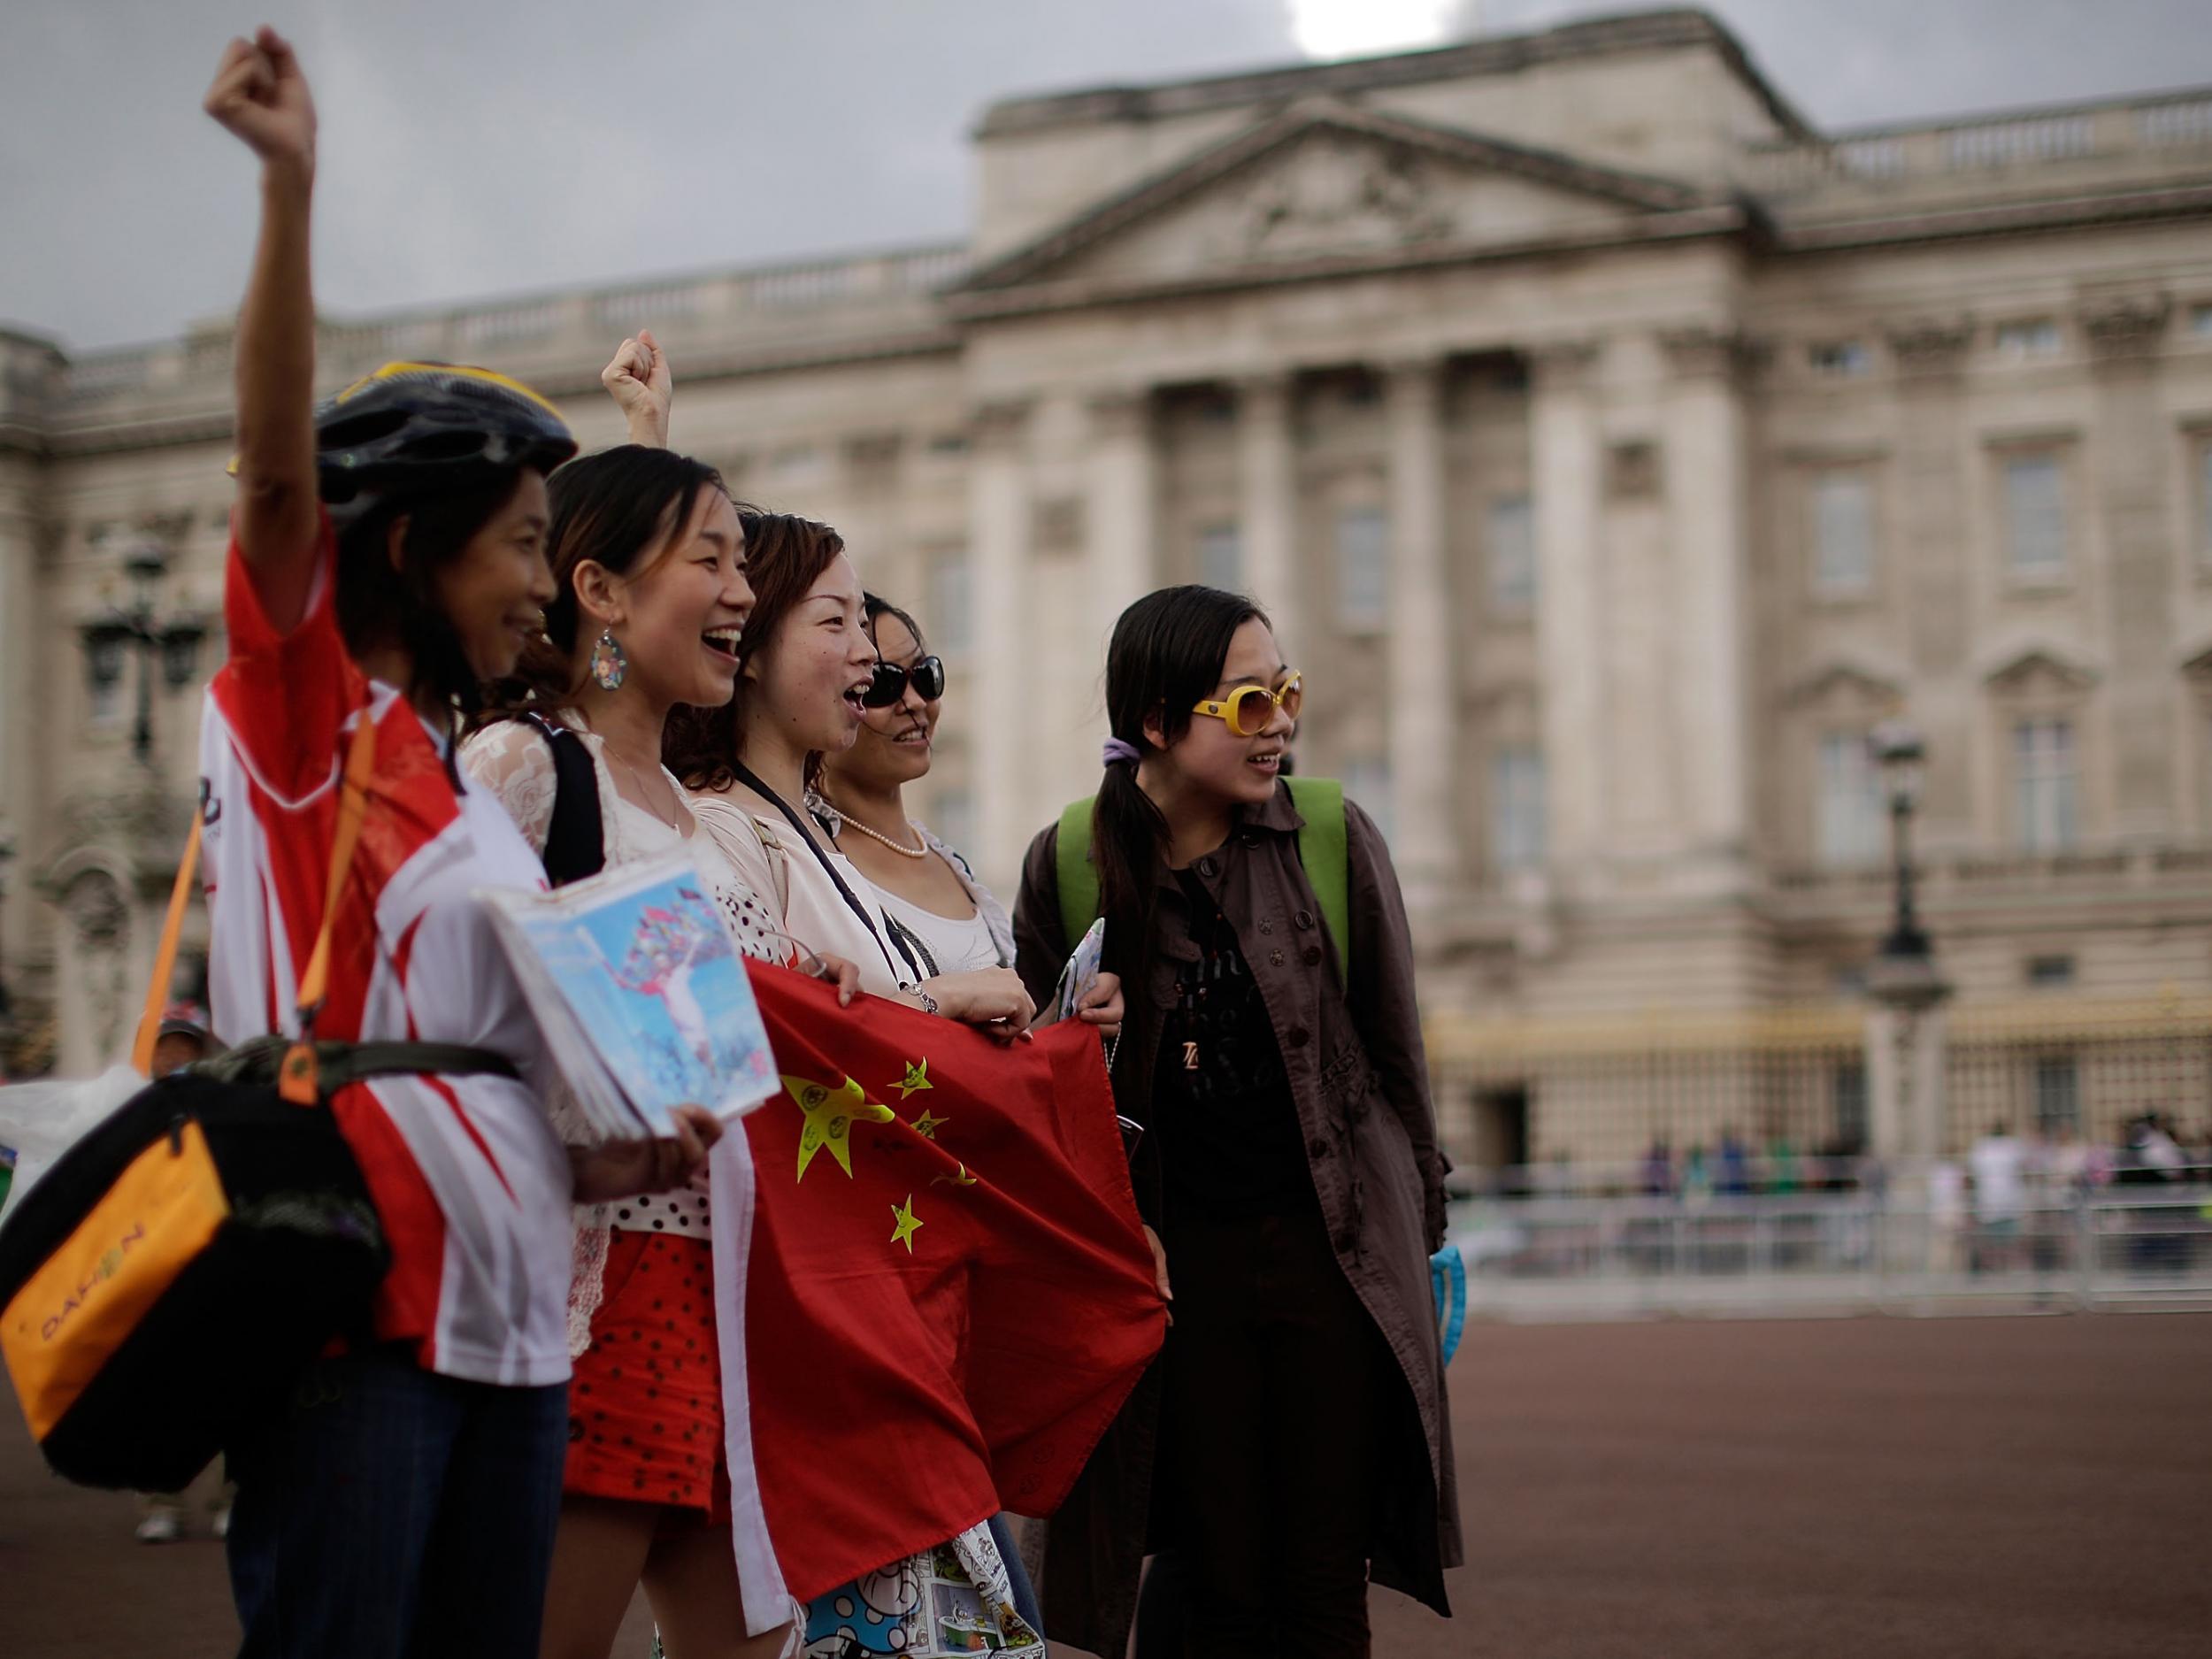 Chinese tourists outside Buckingham Palace. Visitors from the People's Republic made up 2.7 per cent of total tourism spending in the UK in 2014